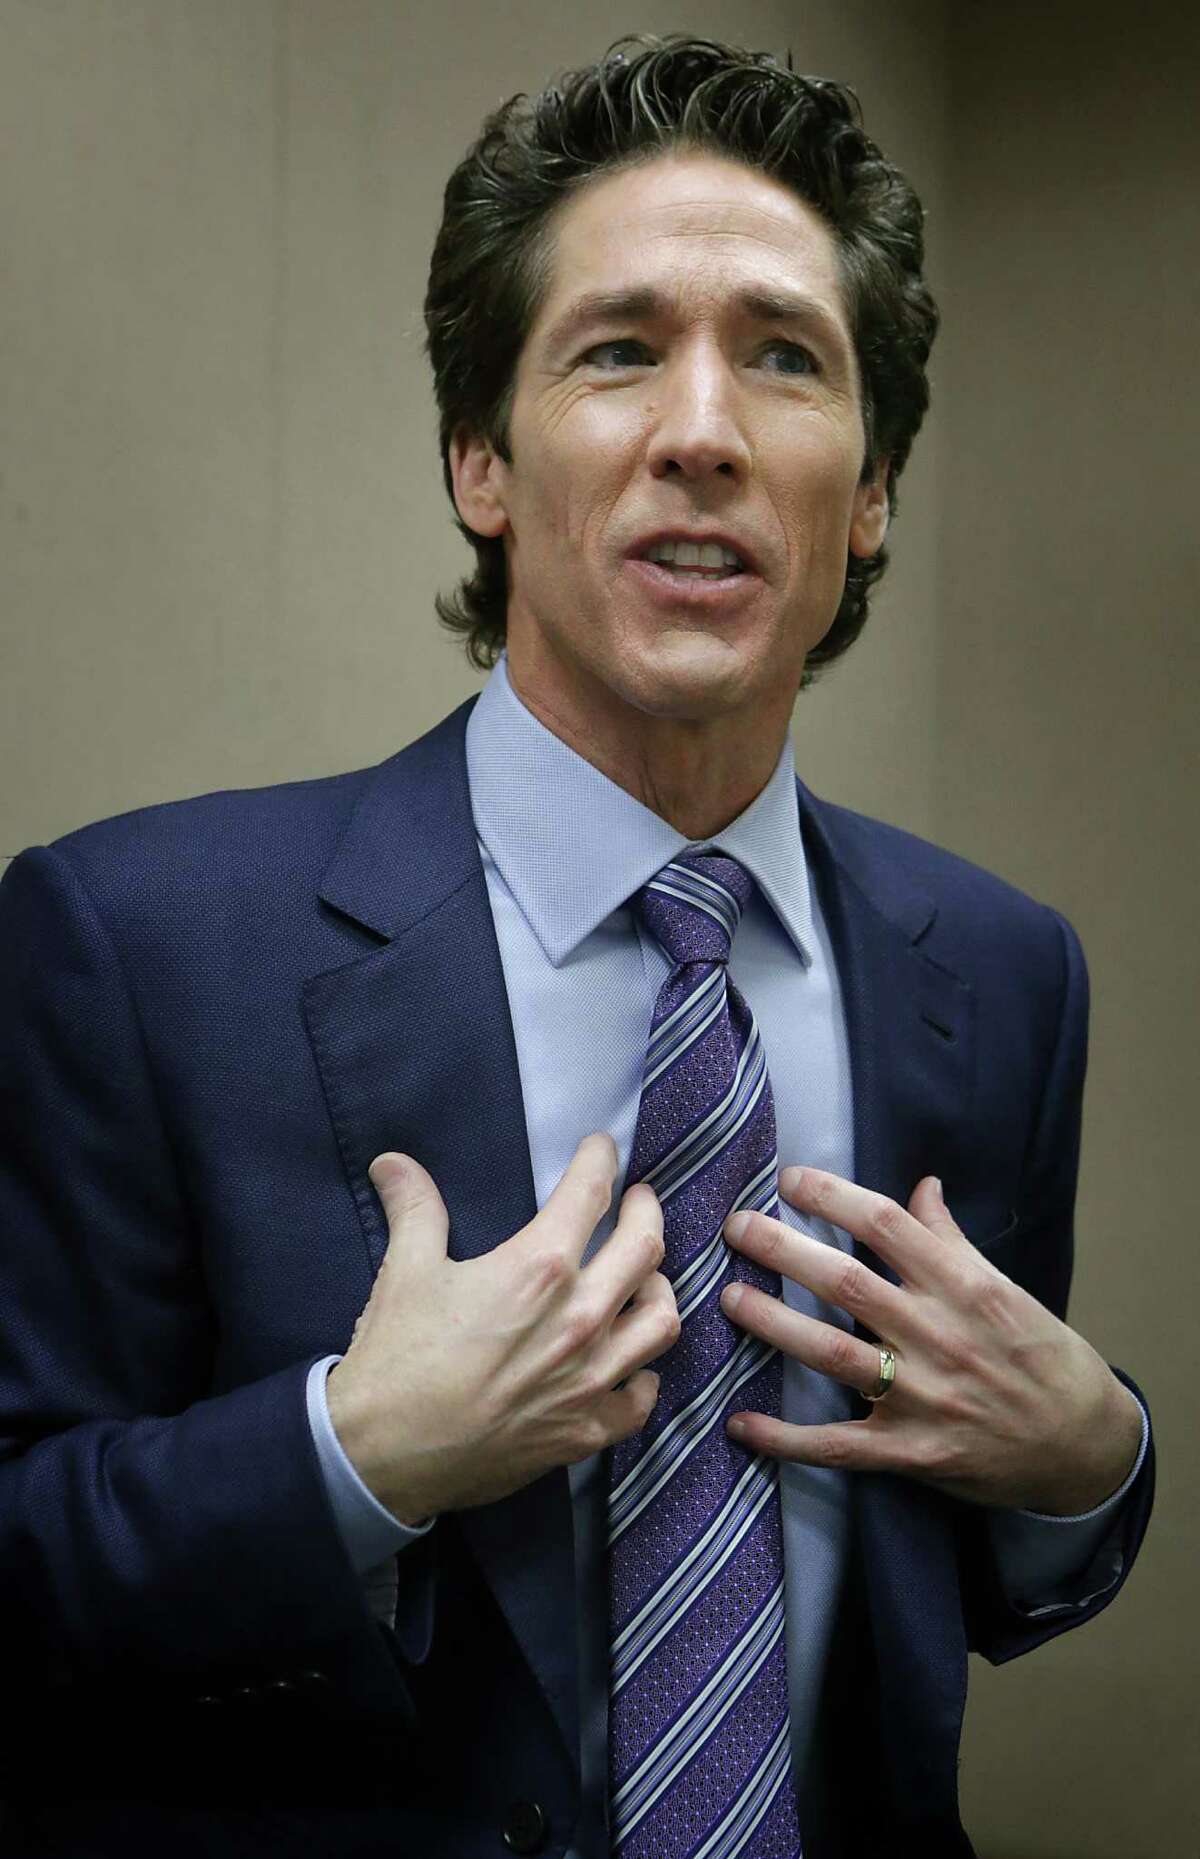 Joel Osteen answers questions about his upcoming performance "Texas-Sized Night of Hope" on May 24 to be held at the Alamodome. Tuesday, April 8, 2014.